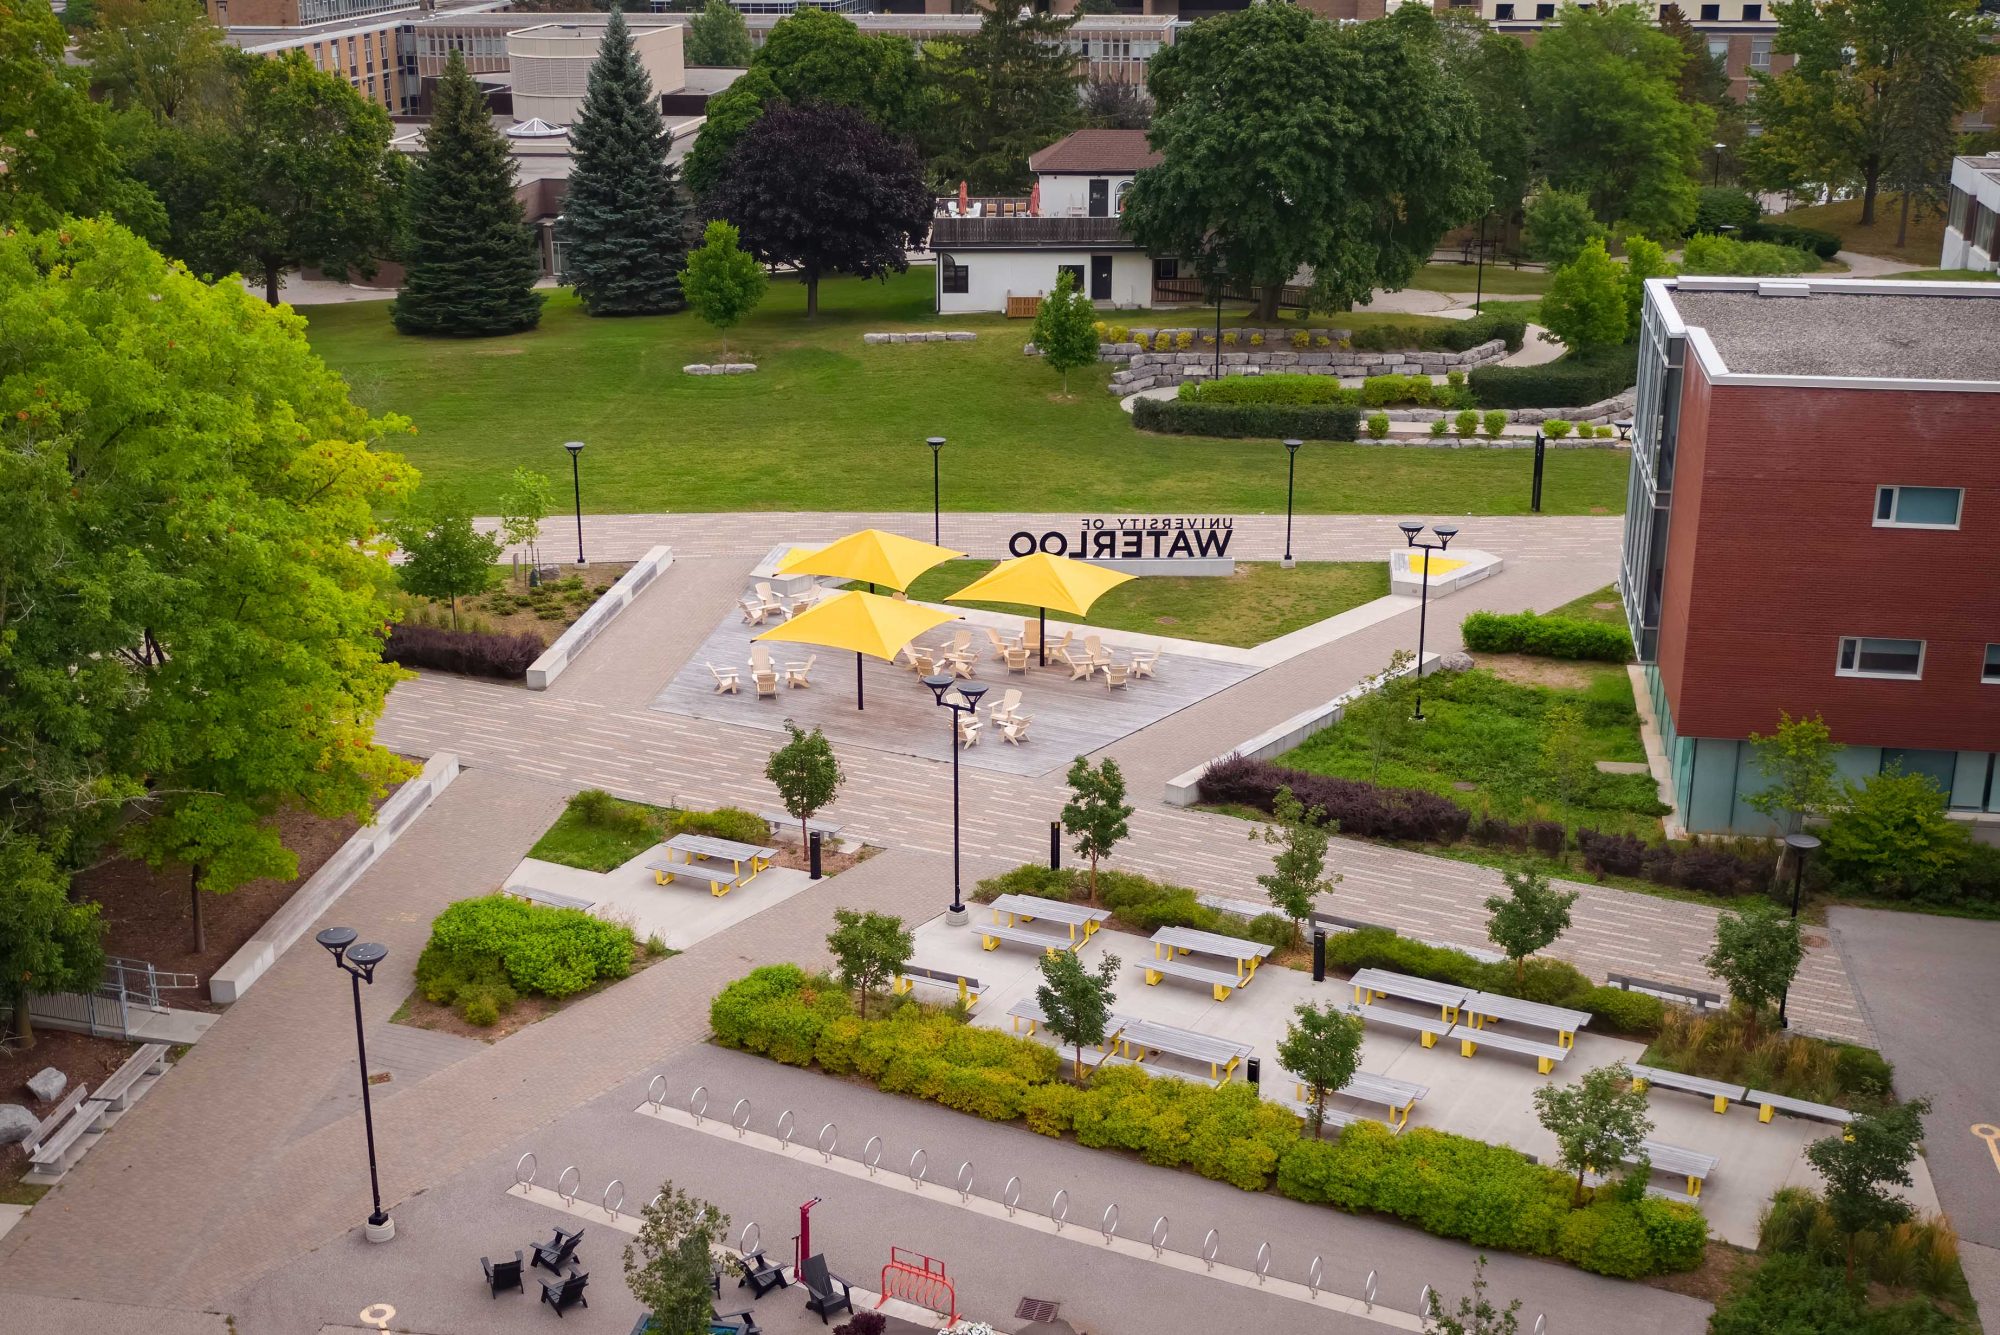 View of the Quad and South Common areas at the University of Waterloo, with three yellow shade umbrellas, Muskoka chairs and wood picnic tables. Bicycle racks are in the foreground.